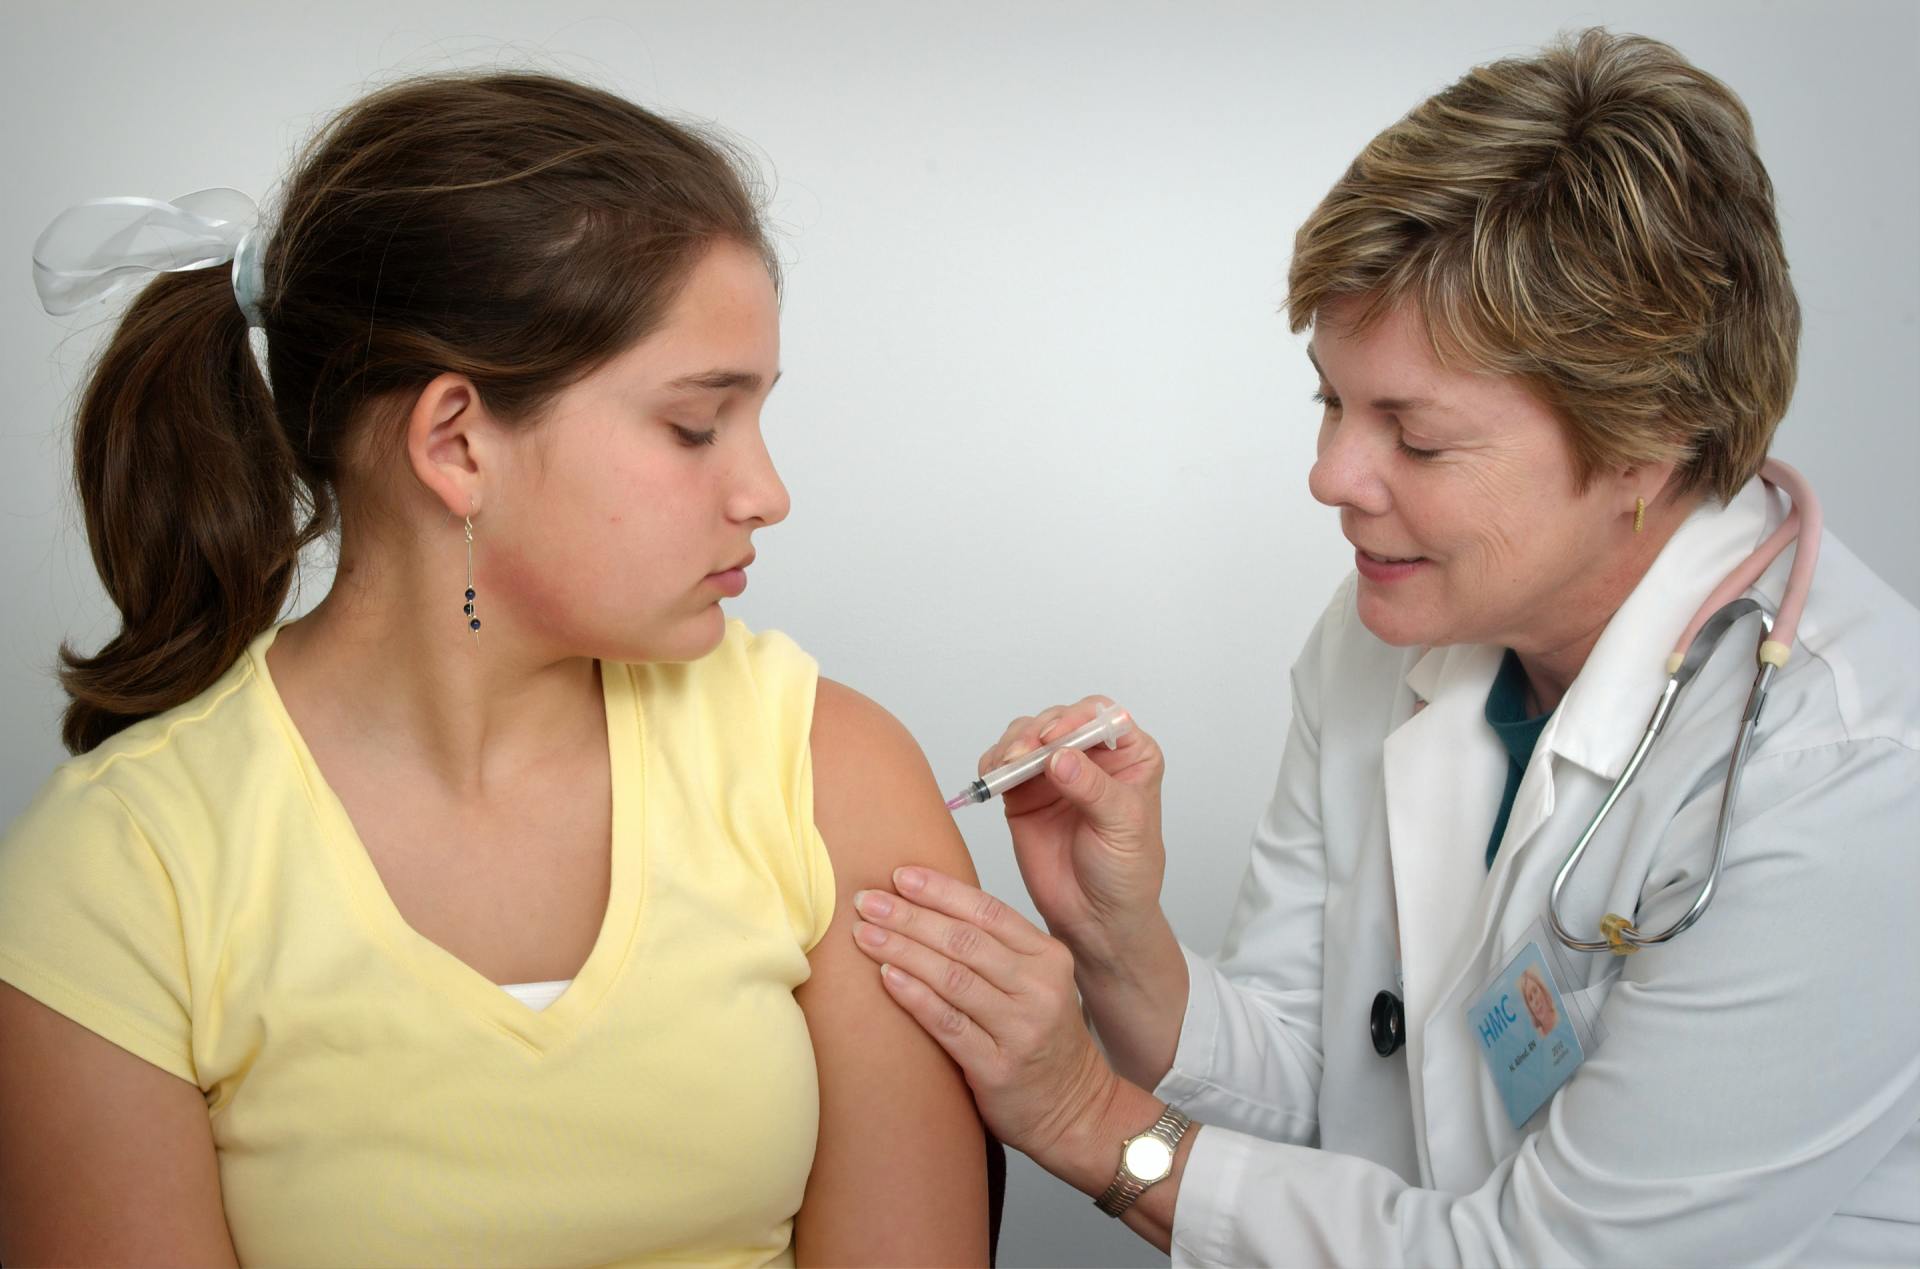 middle aged doctor administering a shot to a young girl in her left arm